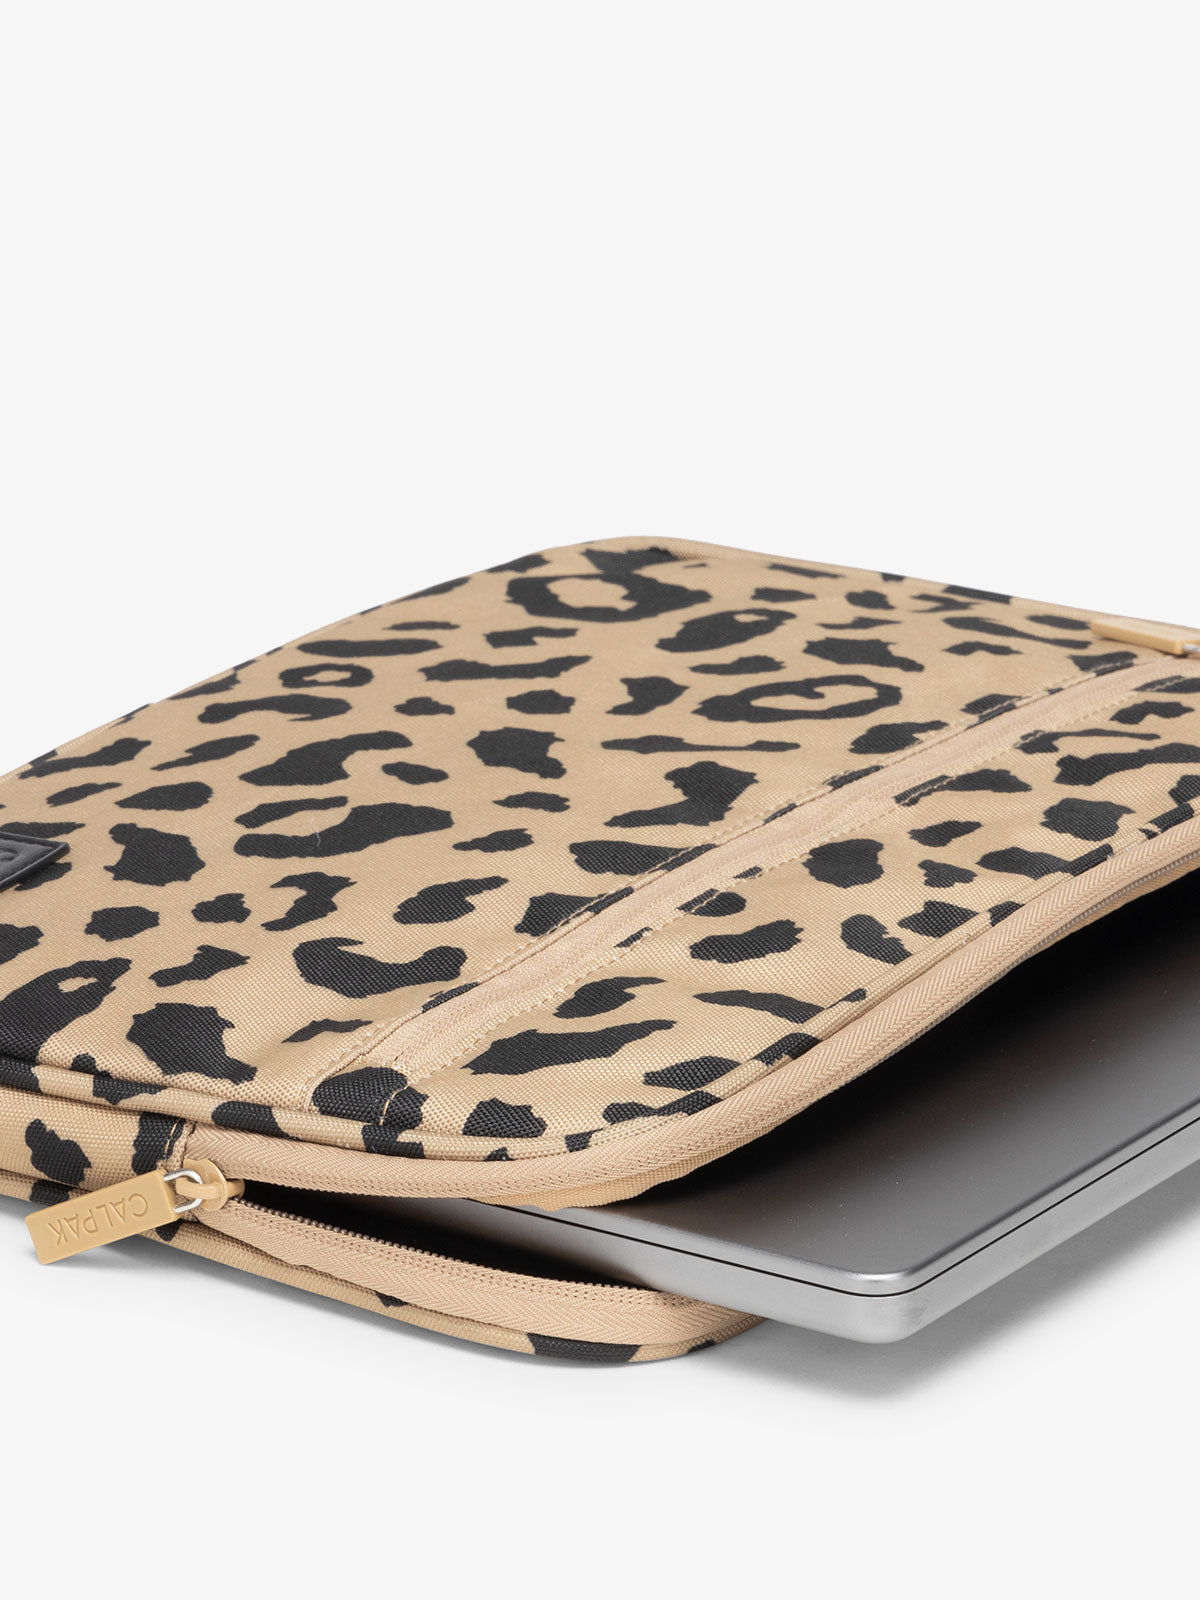 CALPAK 15-17 Inch Protective Laptop case with padded pockets for travel in cheetah print